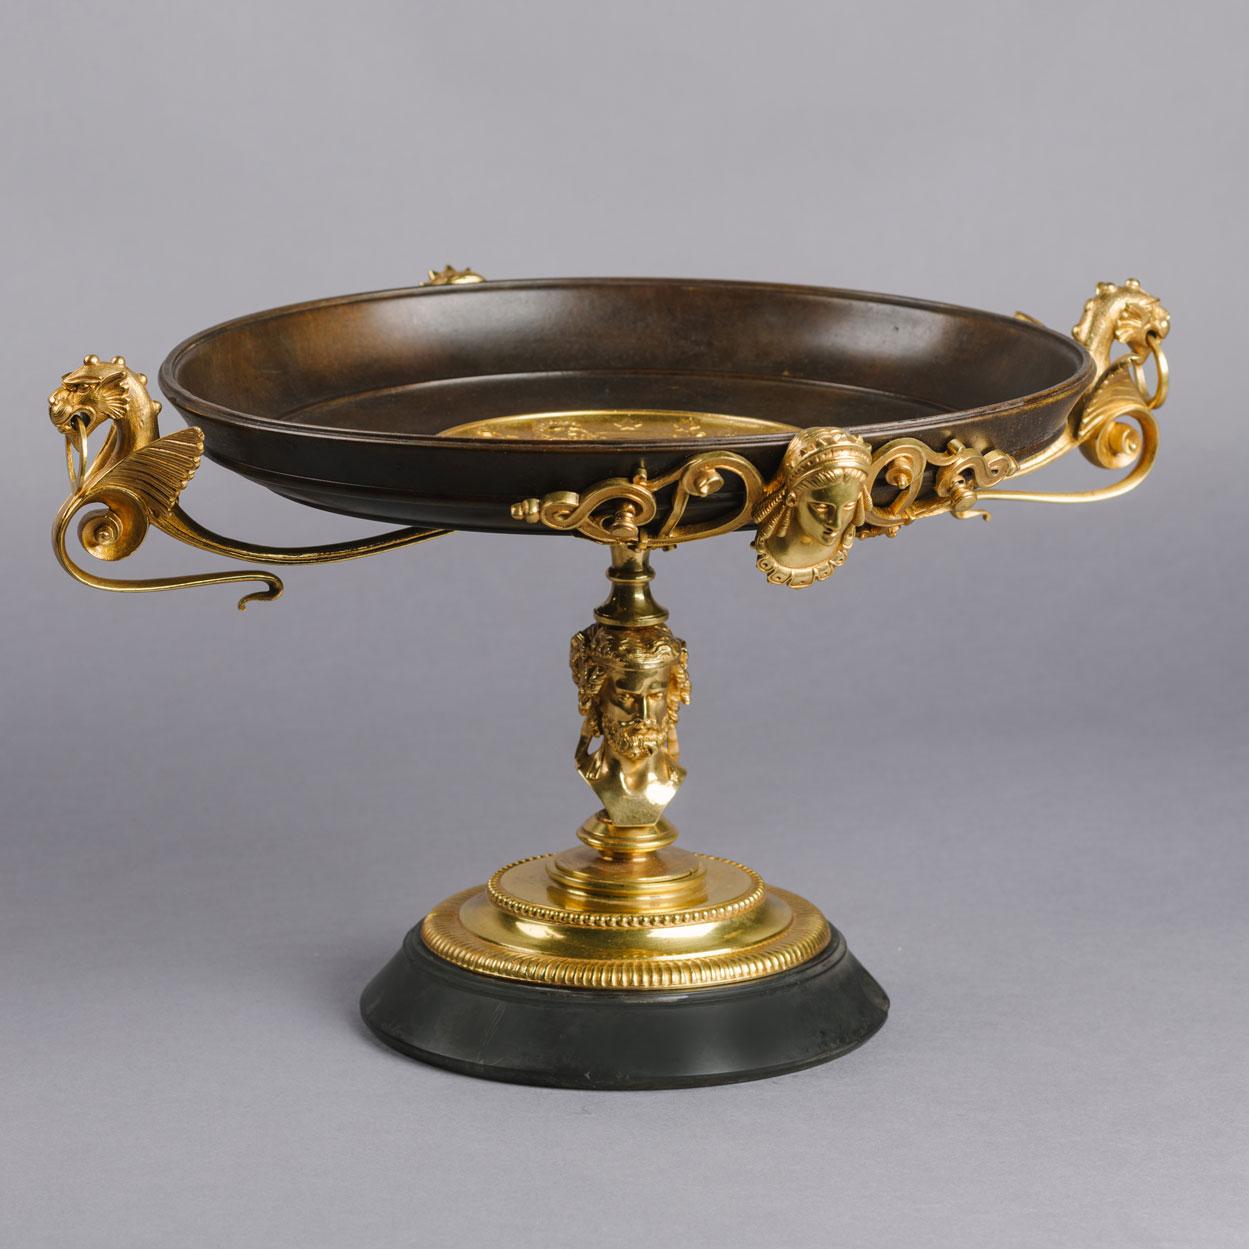 A fine neoclassical Revival gilt and patinated bronze Tazza.

The circular dish centred by a gilt-bronze roundel of the Greek God Zeus enthroned, flanked by chimerical handles and raised on a figural stem with a spreading stepped foot, on a grey